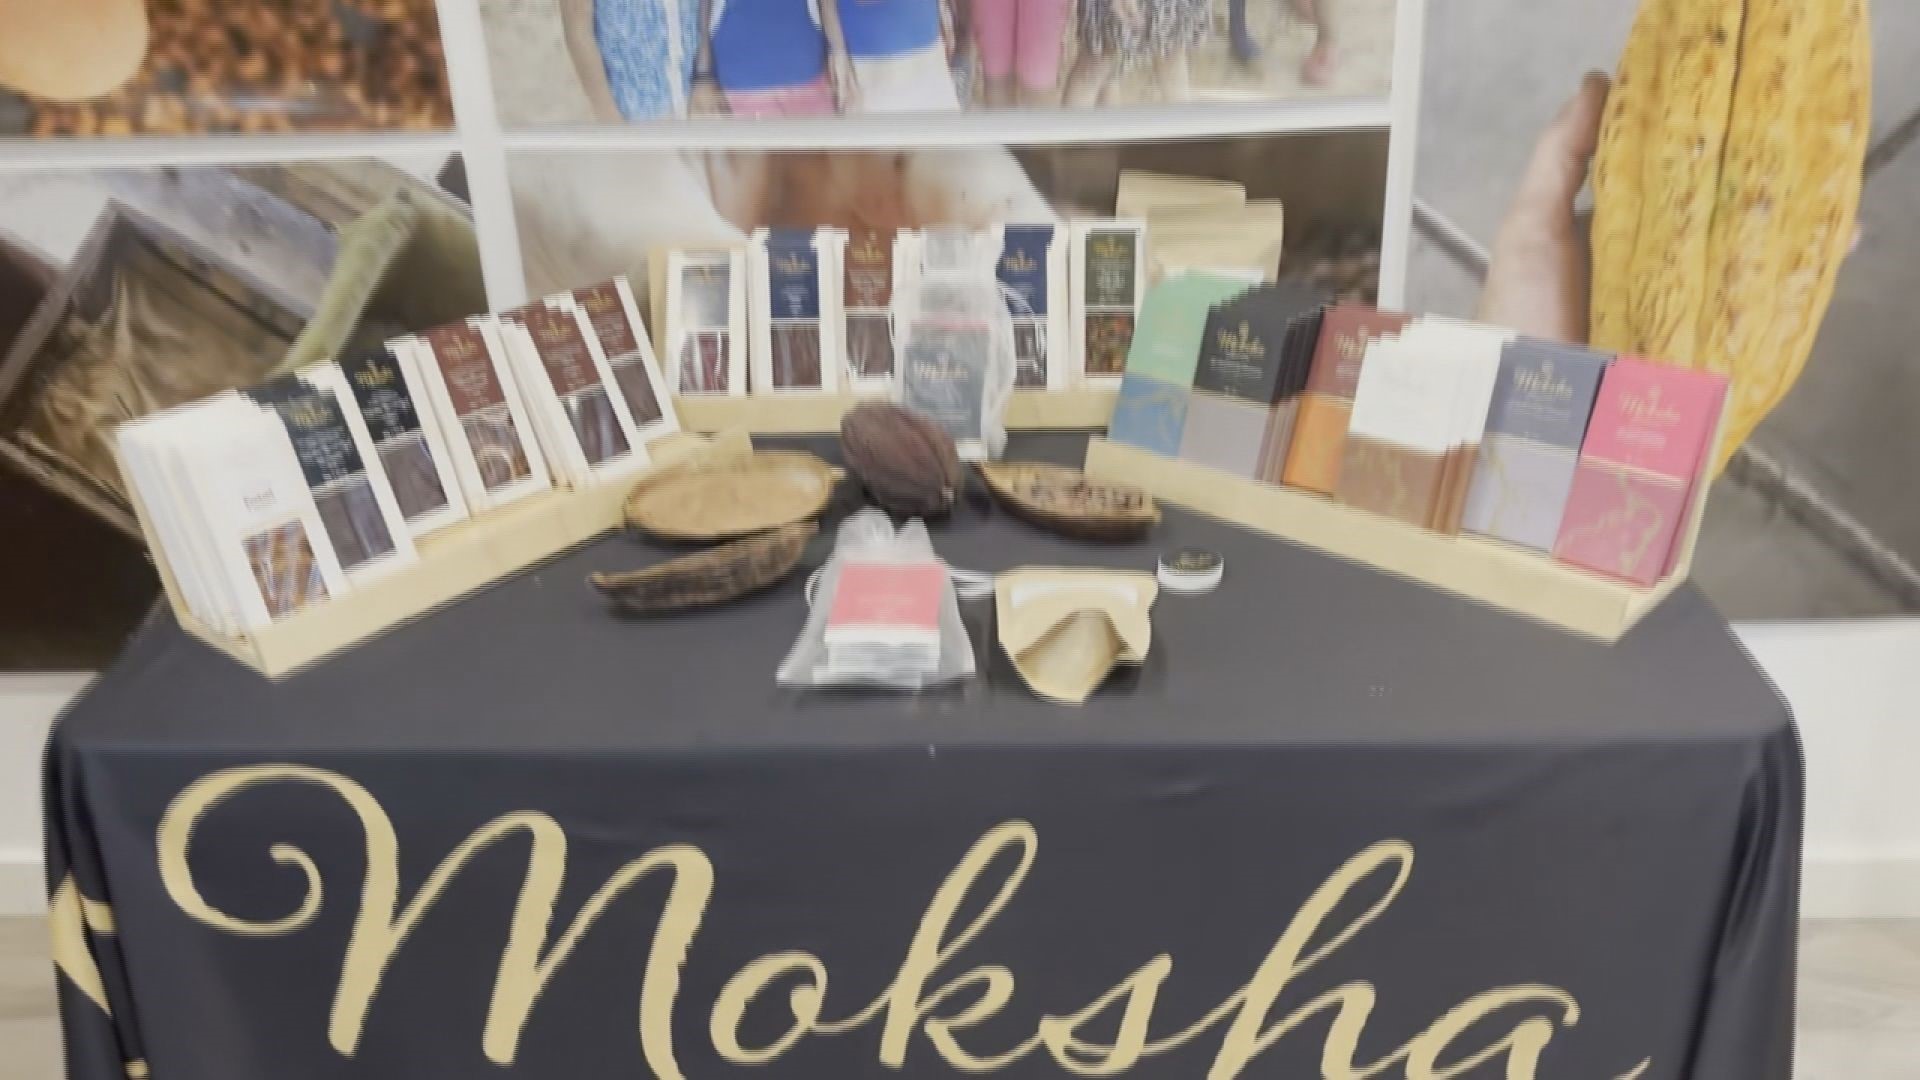 Ryan Frazier talks with Jennifer Caines, owner of Moksha Chocolate, about the craft chocolate business this holiday season.